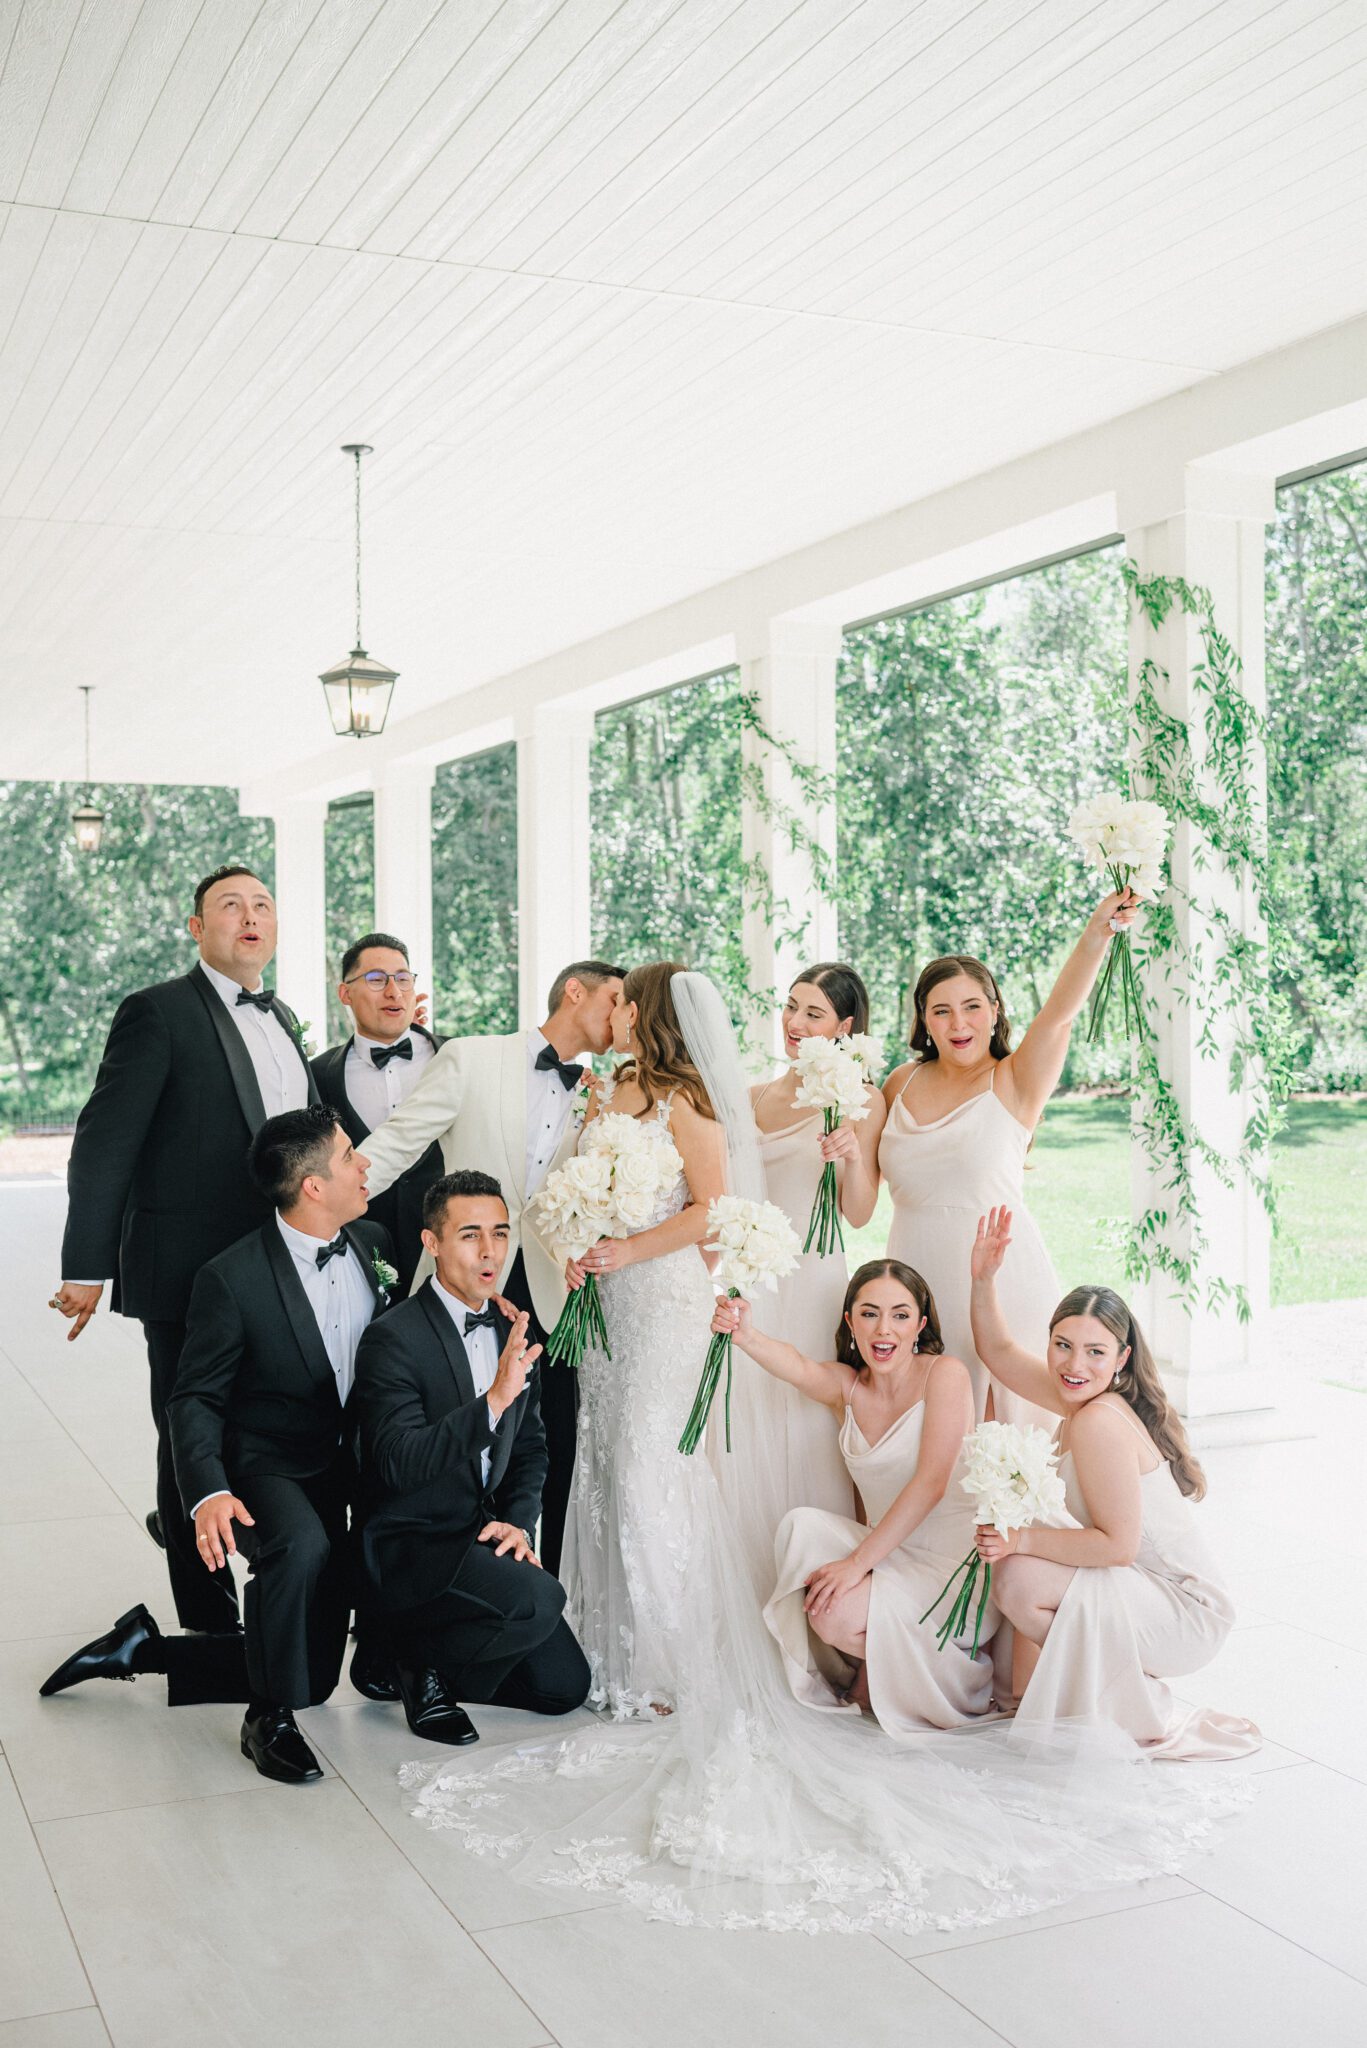 Elegant wedding party outside of Sparrow Lane Events in Alberta. Classic colour palette of white, blush, and green wedding inspiration.